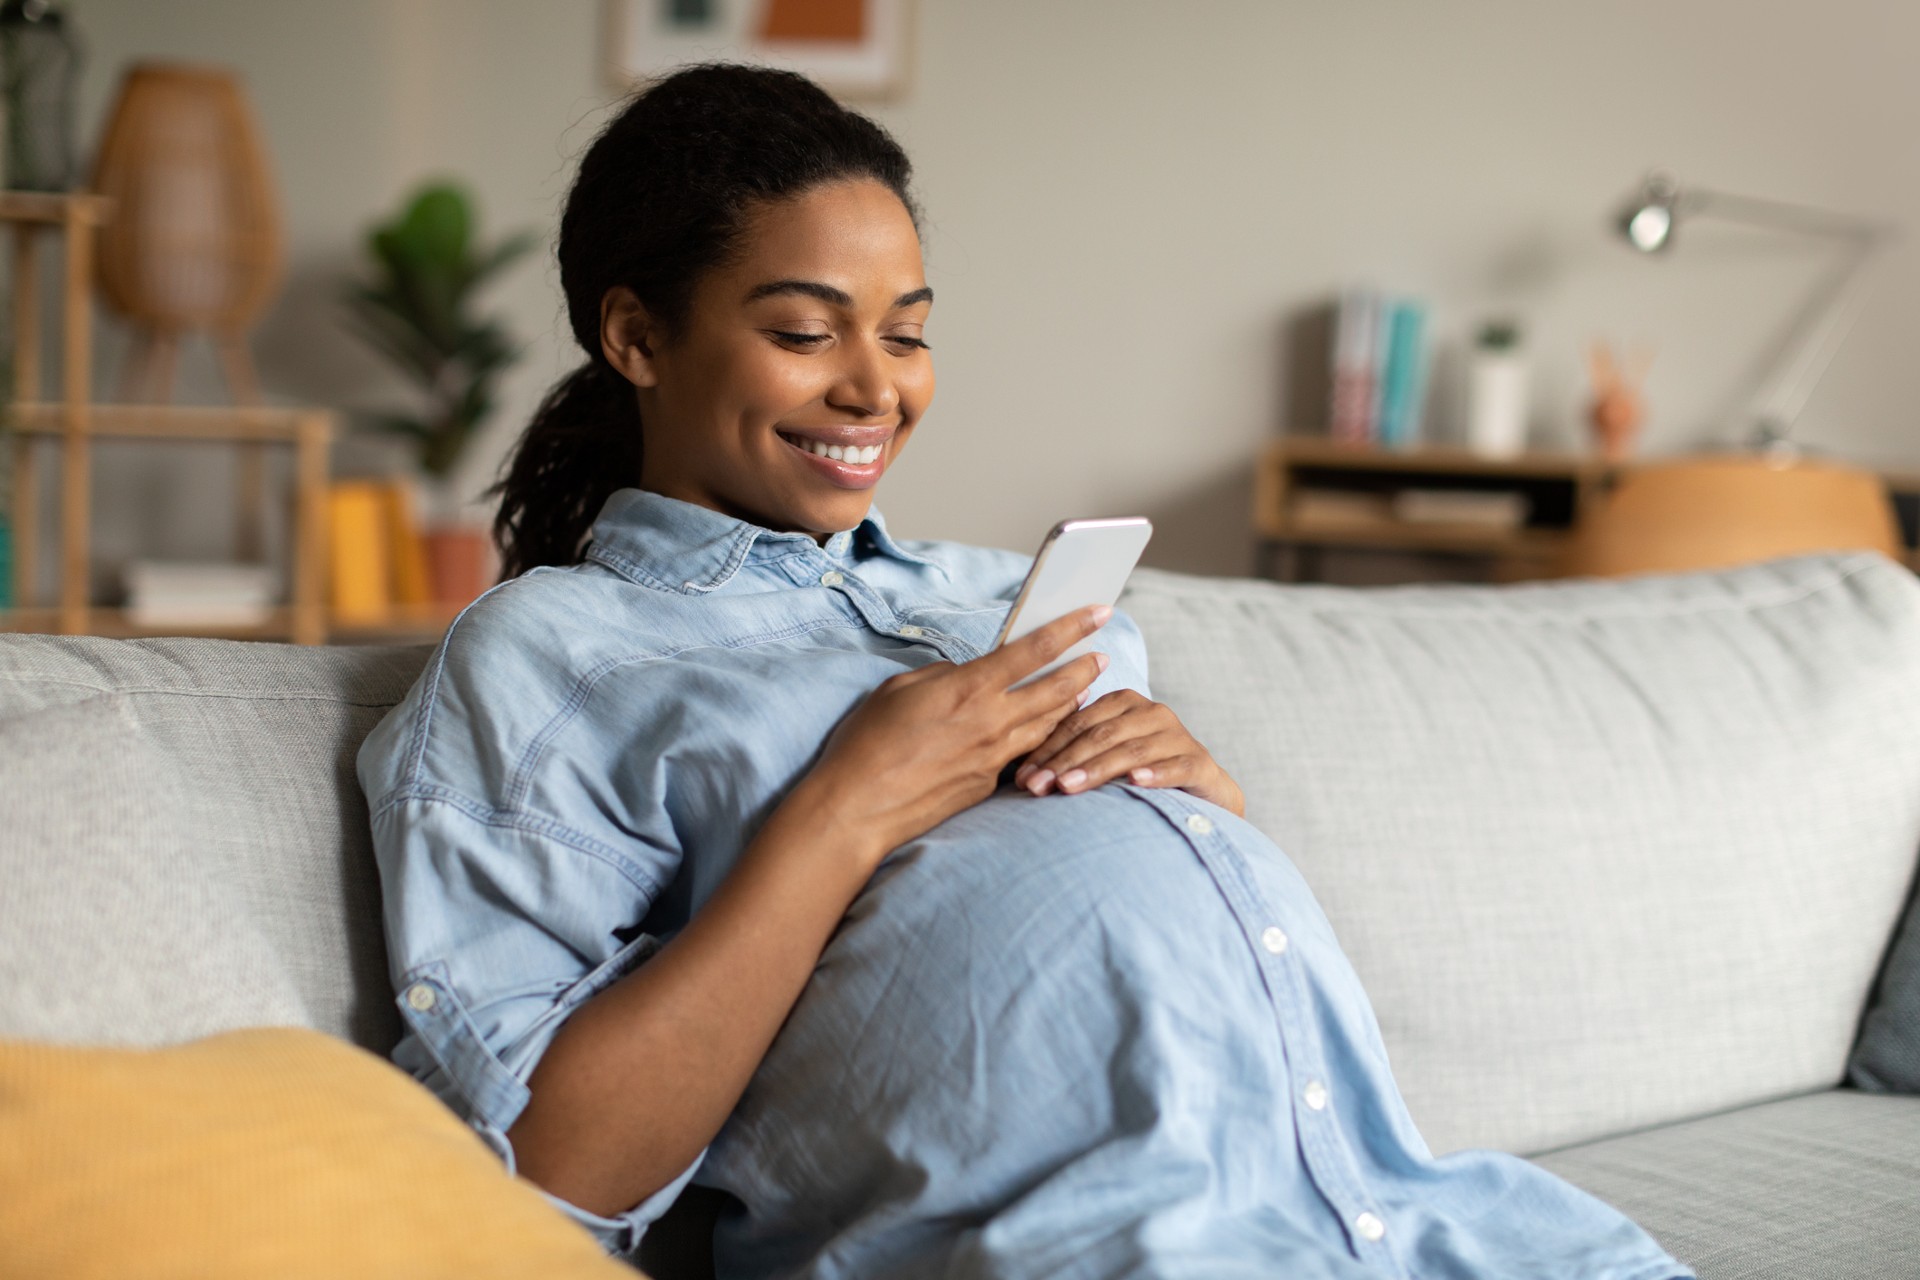 pregnant woman in final trimesters of pregnancy looking down on phone